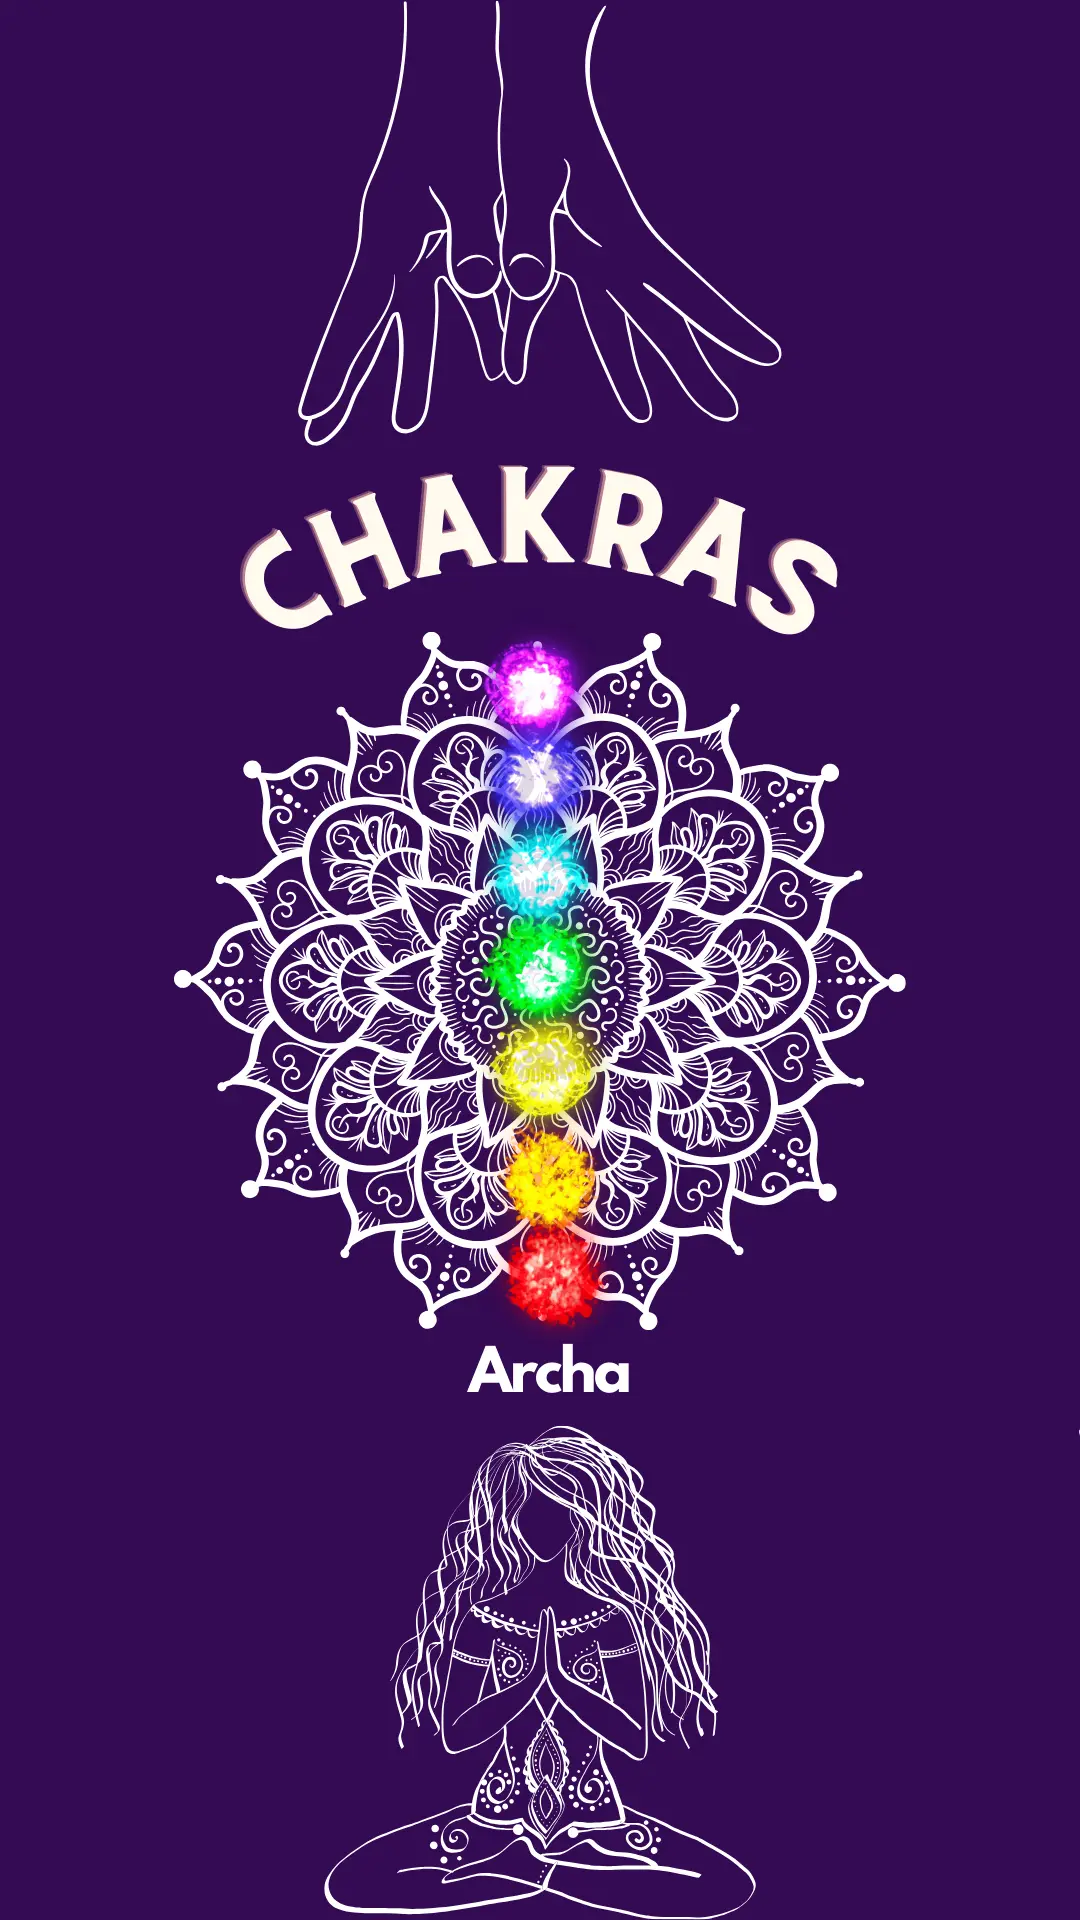 Are all your Chakras open?